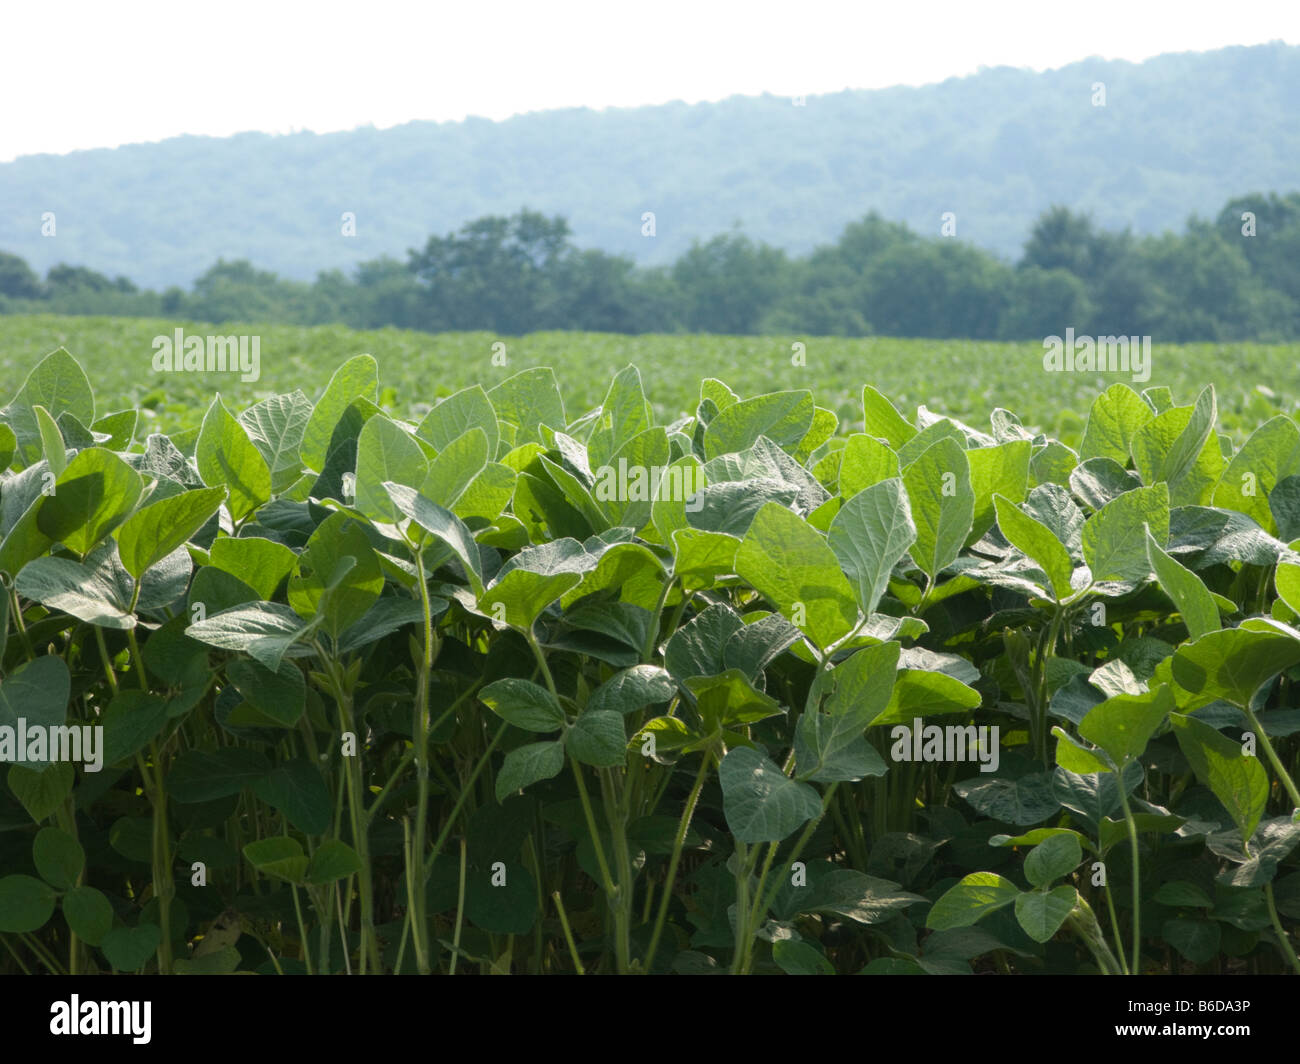 FIELD OF COMMERCIAL AGRICULTURAL SOY BEAN PLANTS Stock Photo